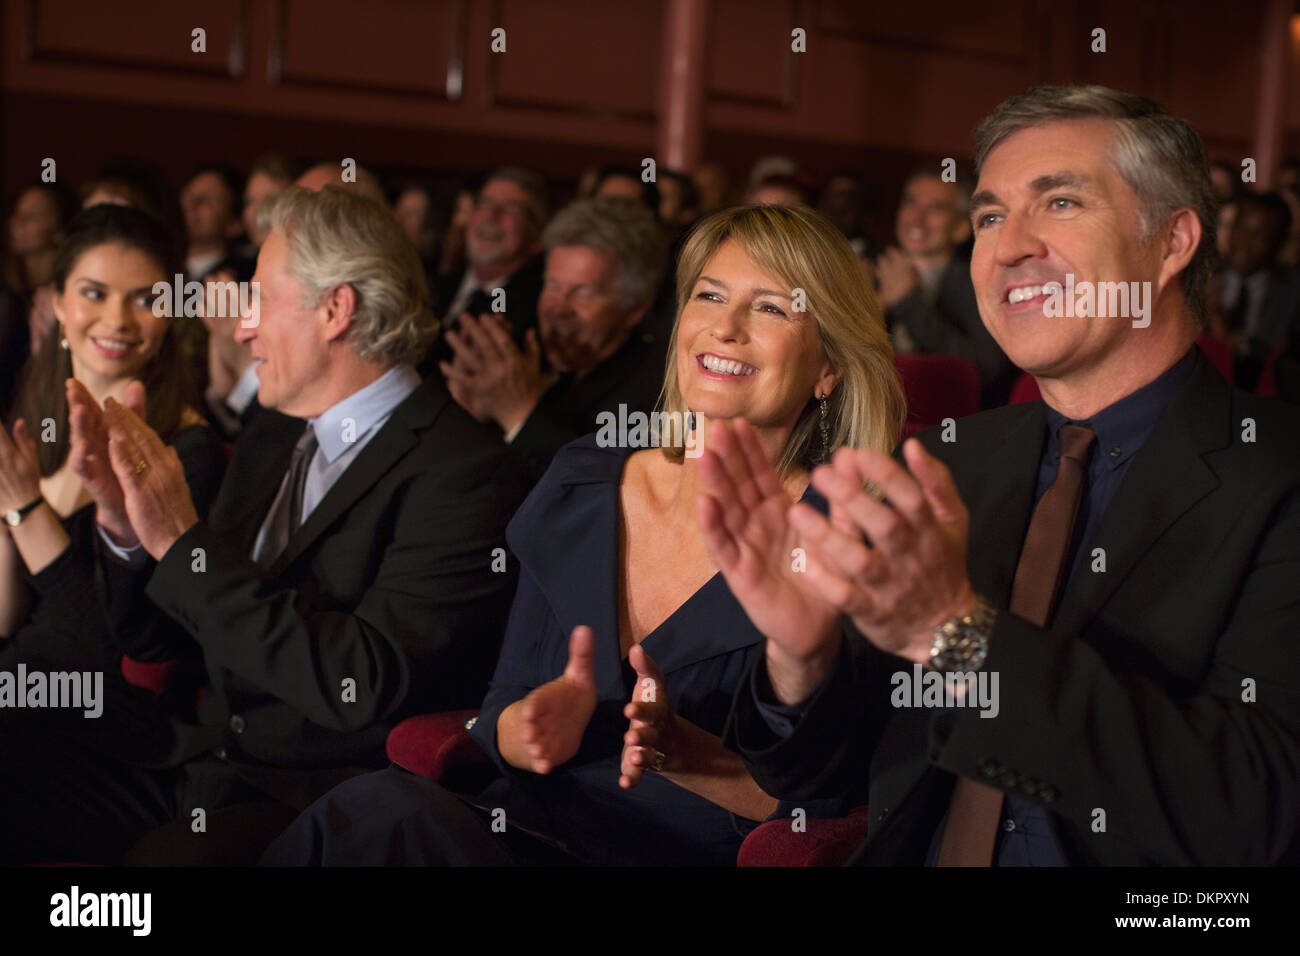 Clapping theater audience Stock Photo